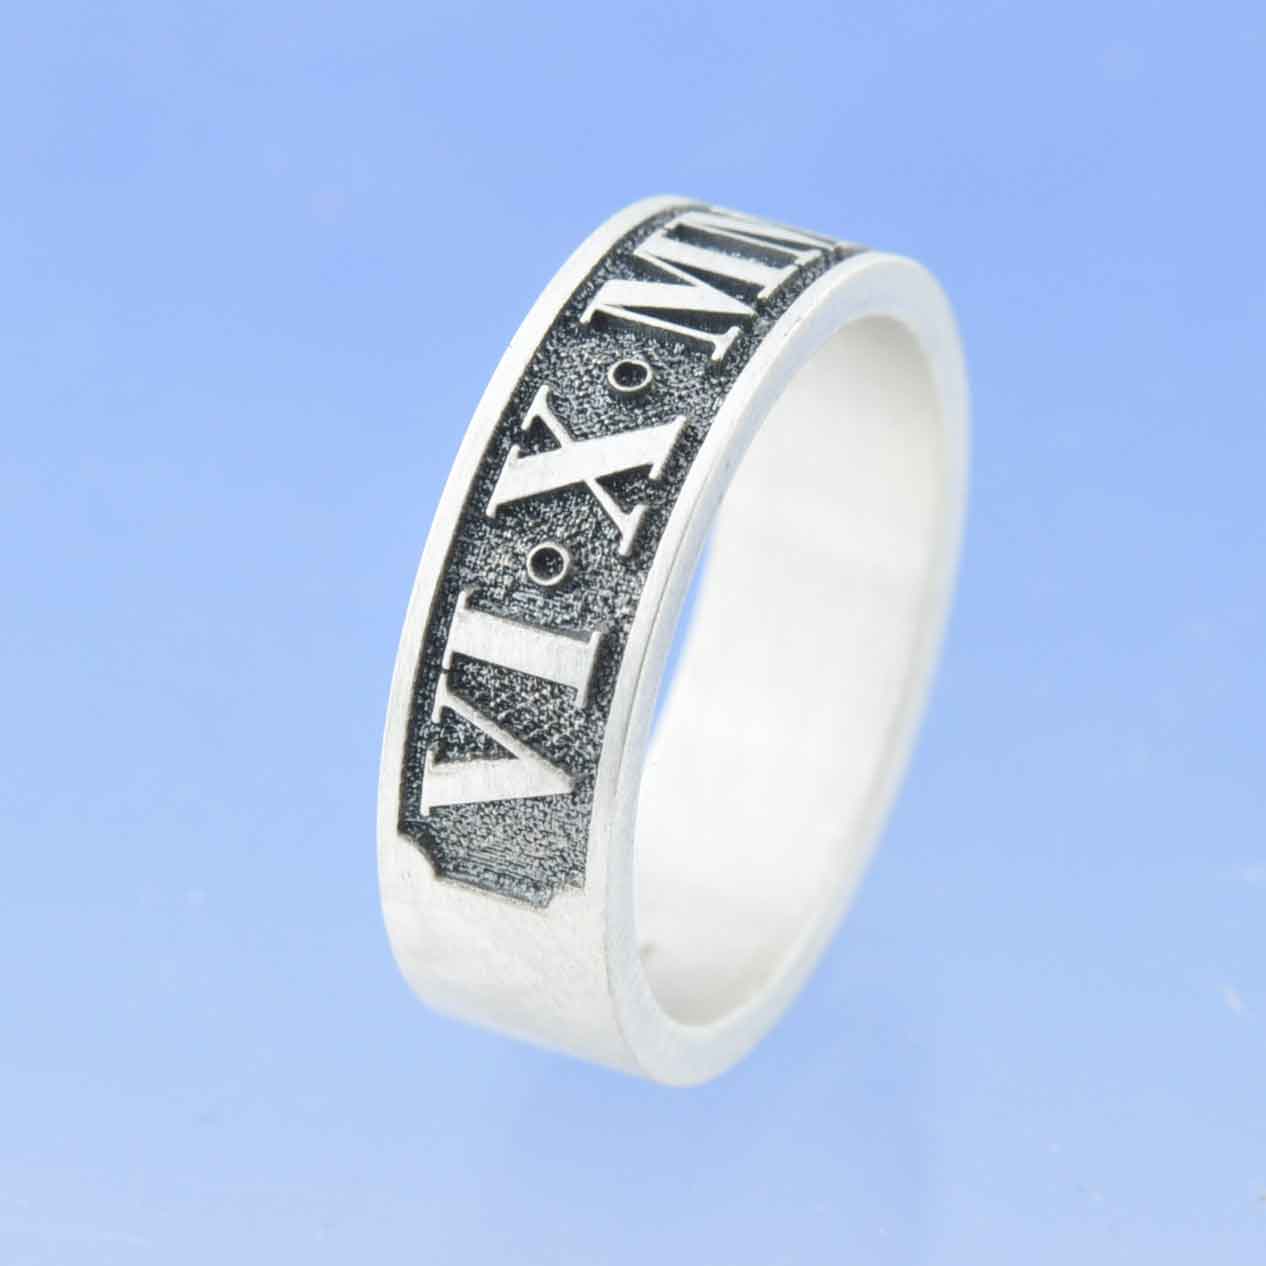 Roman Numeral Embossed Ring by Chris Parry Jewellery